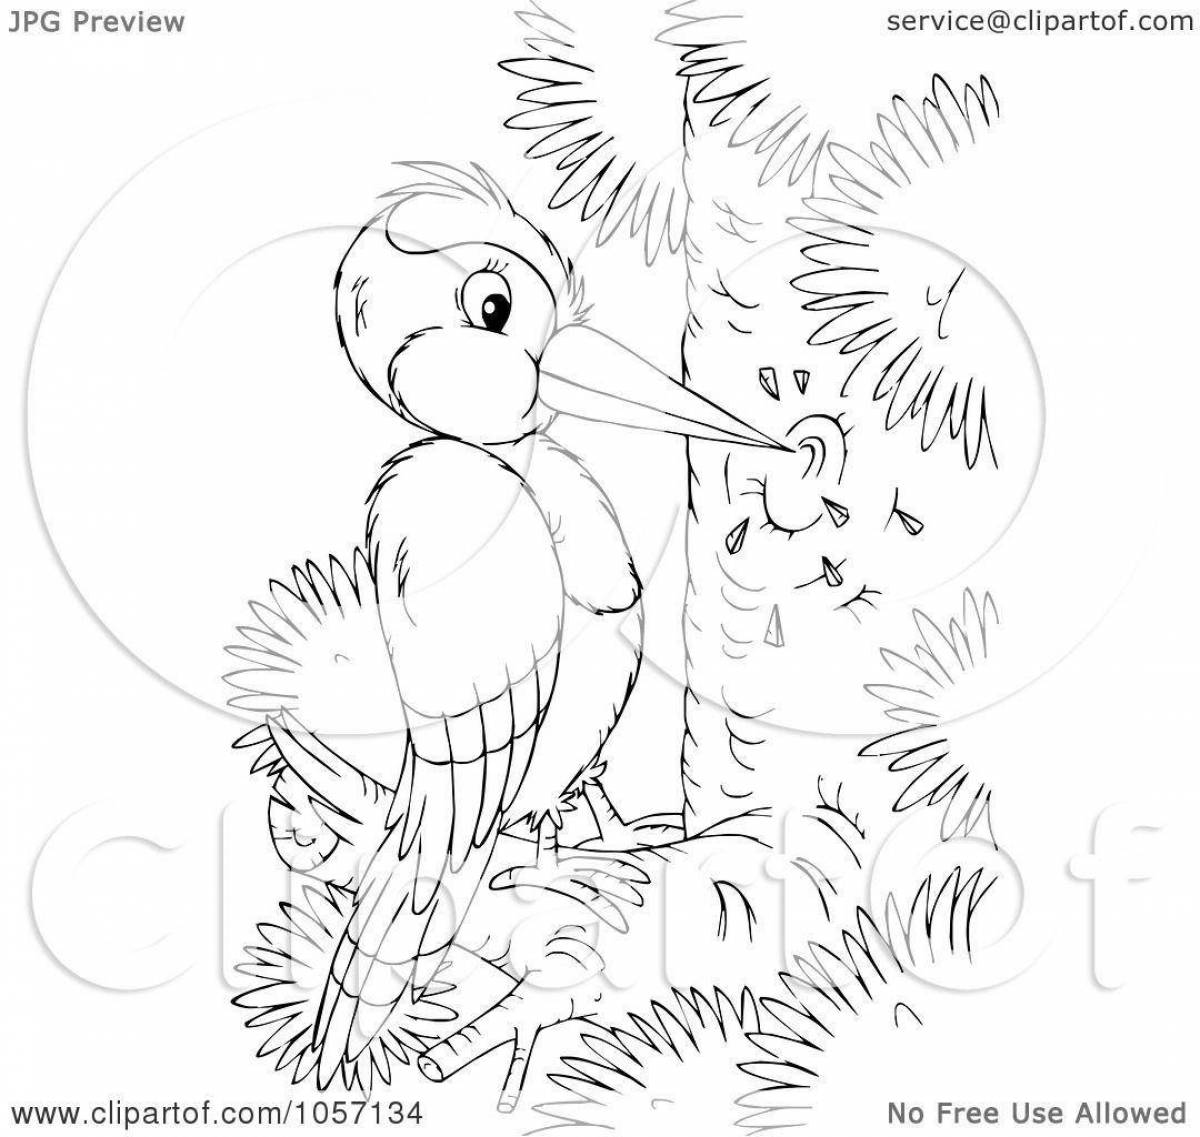 Adorable woodpecker coloring page for children 6-7 years old